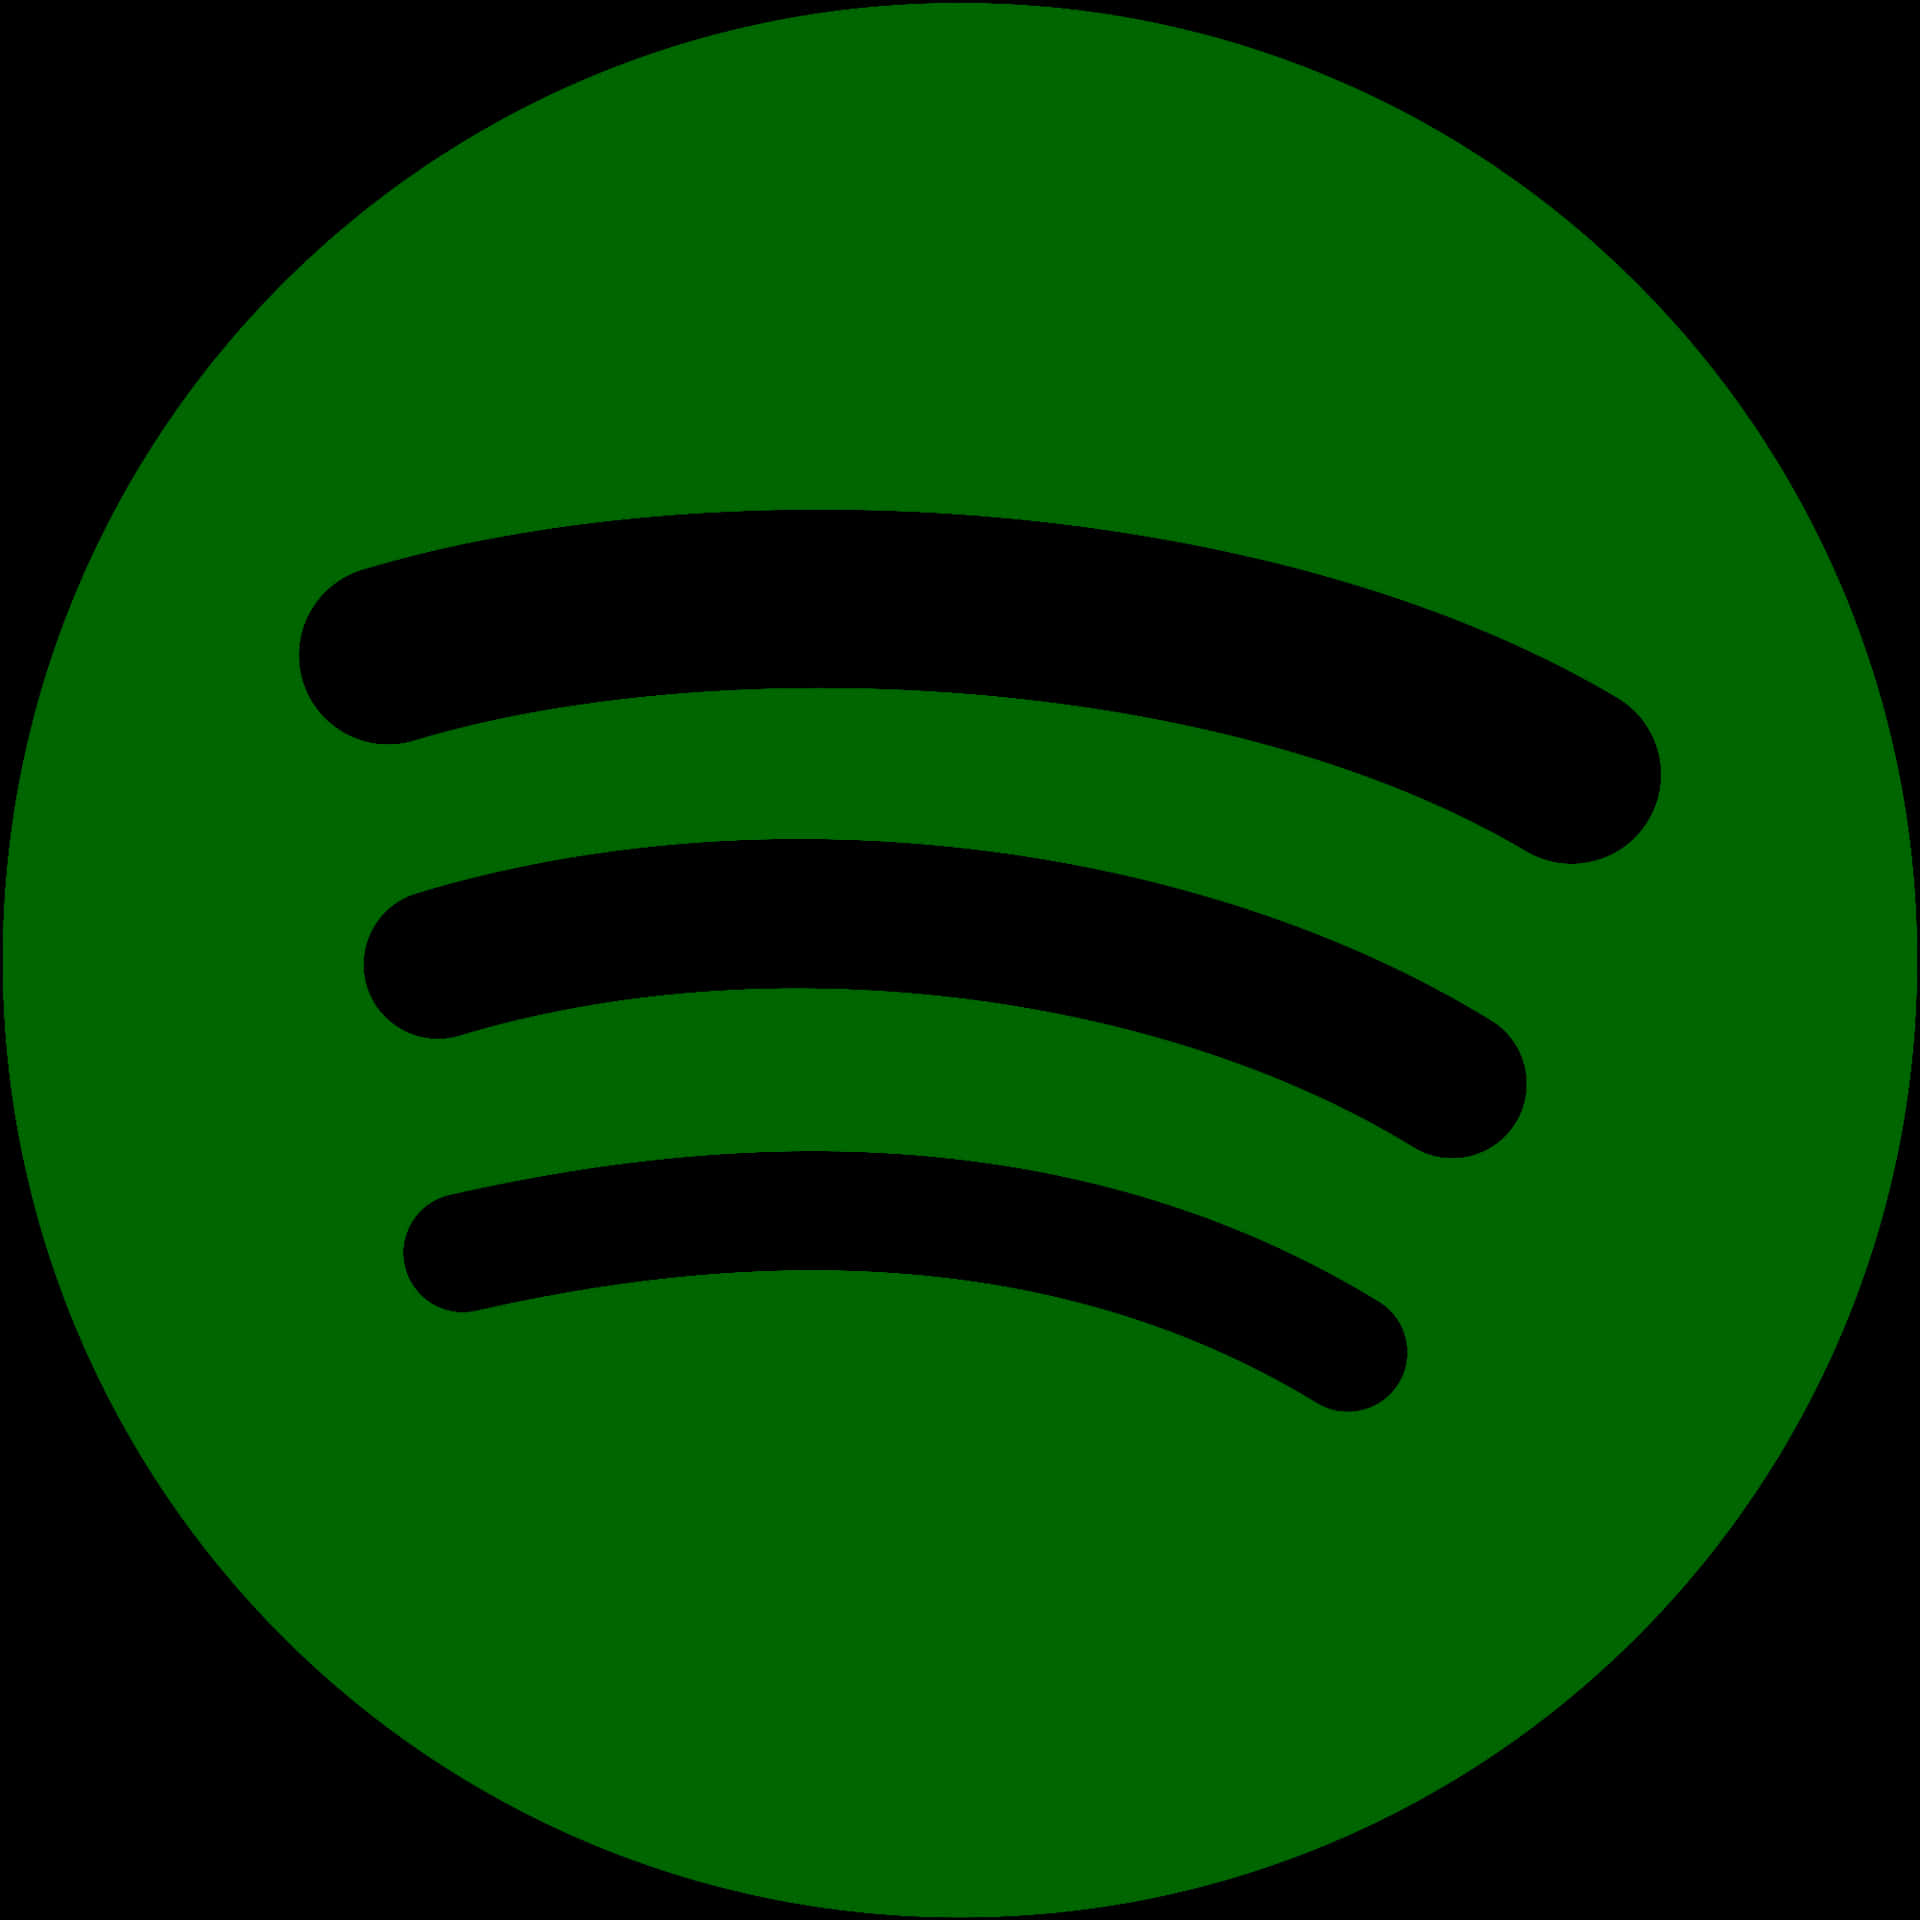 Spotify Logo Green Background PNG image